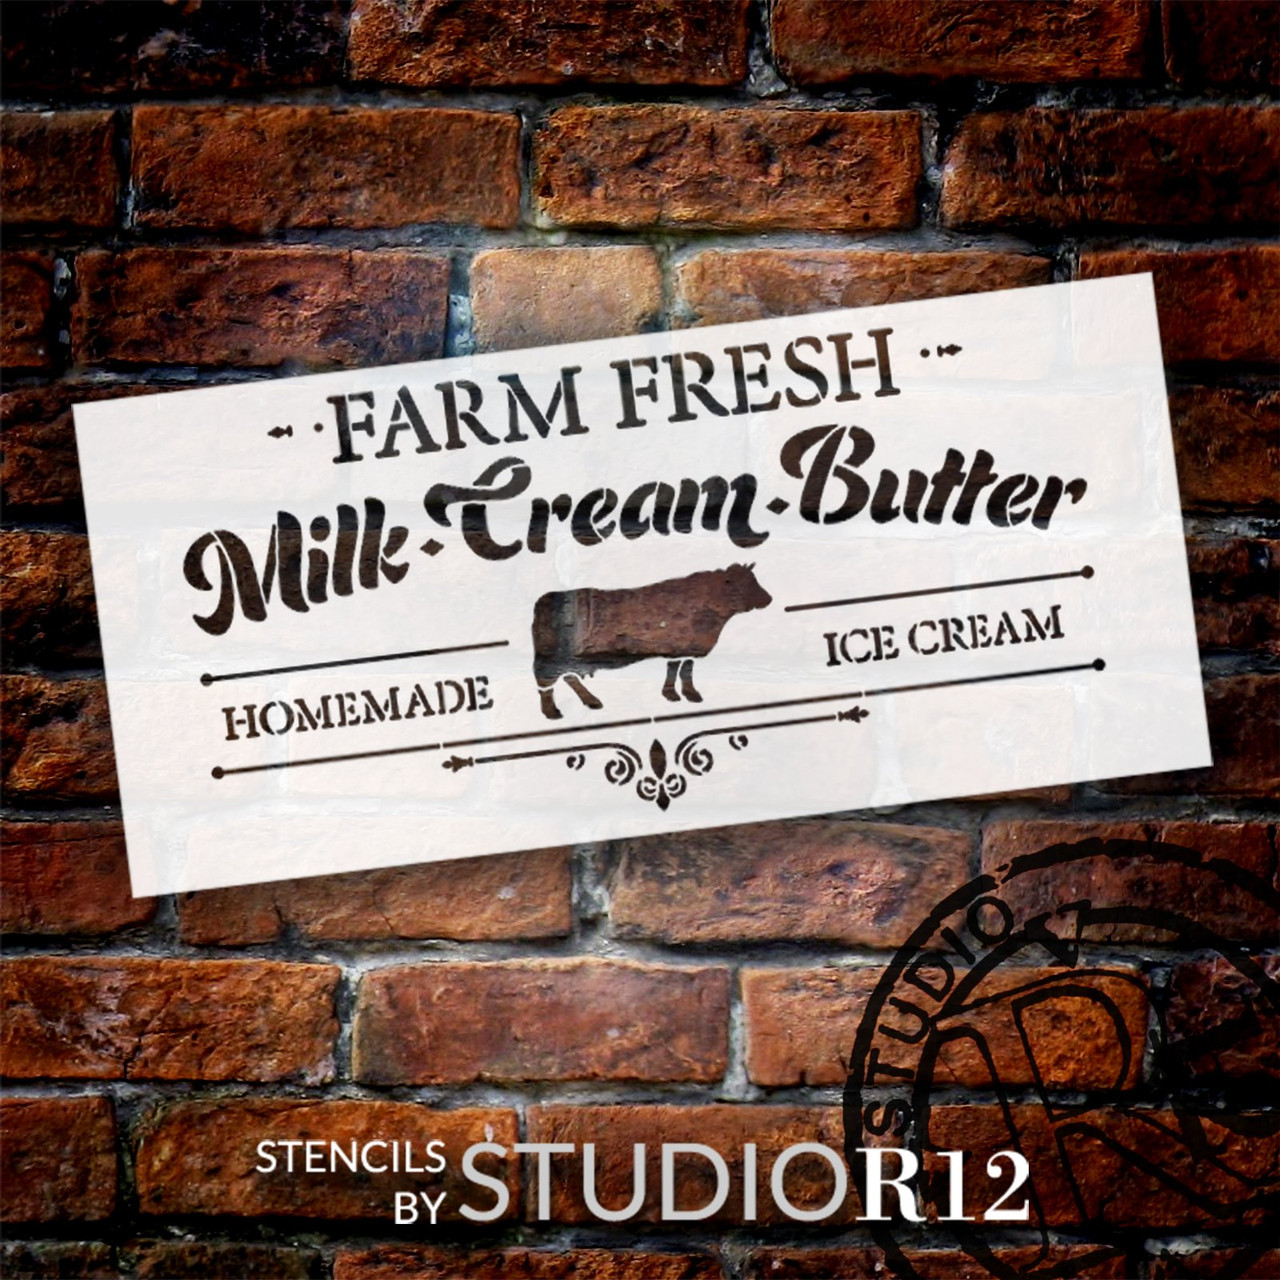 Embellished Farm Fresh Milk & Cream Stencil by StudioR12 | Craft DIY Farmhouse Kitchen Decor | Paint Rustic Wall Hanging Sign for Pantry | Select Size